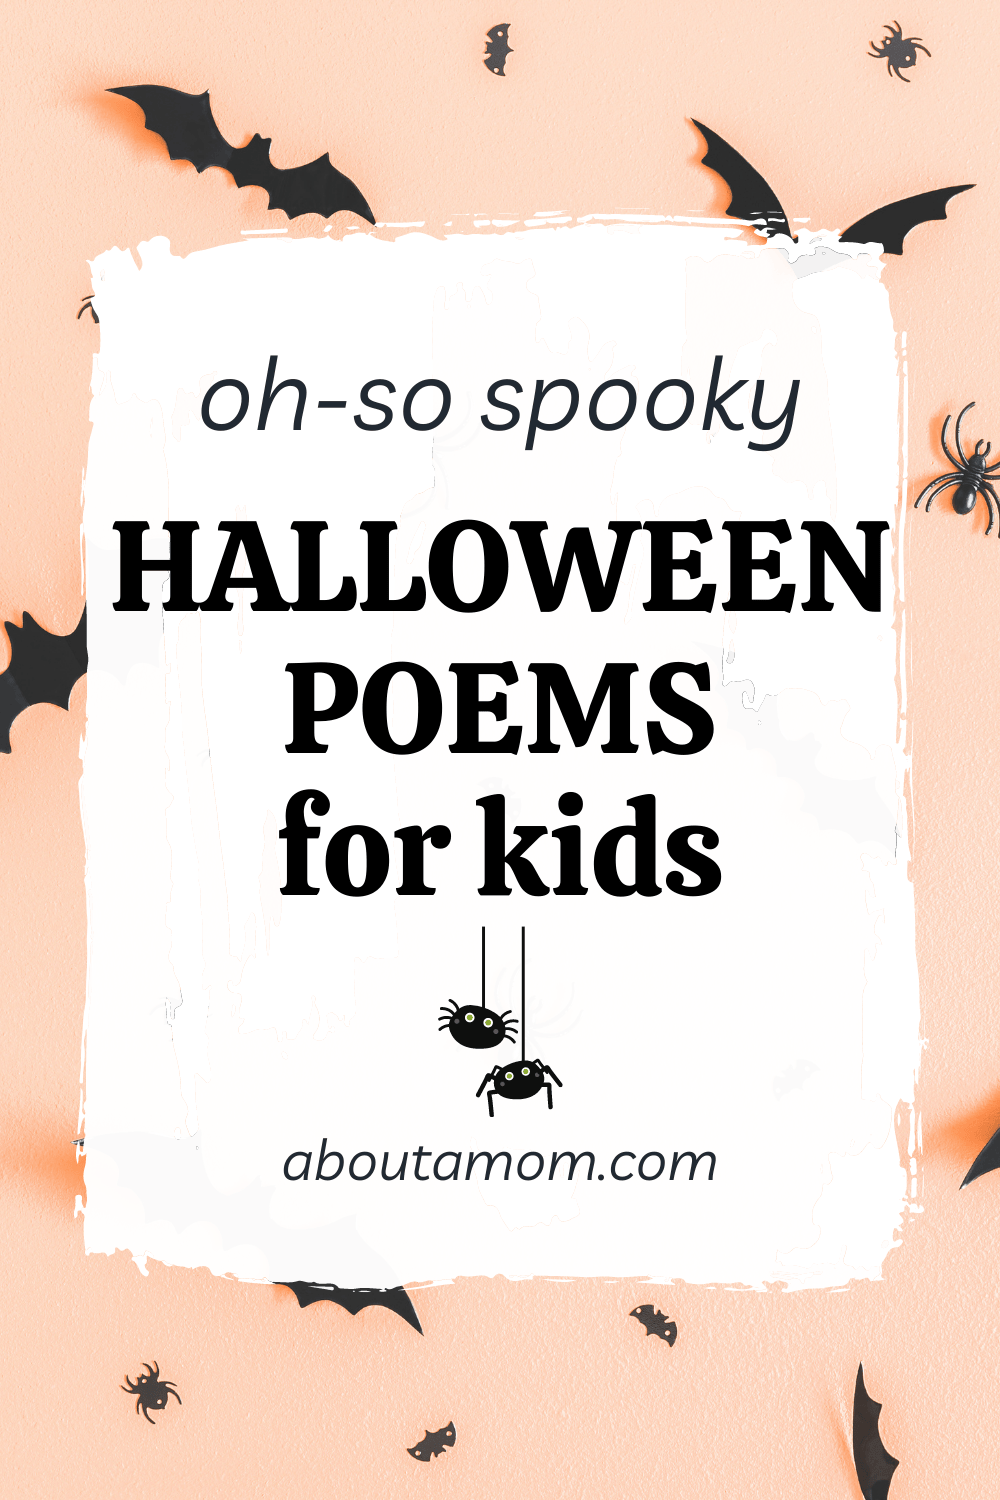 The best Halloween poems for kids of all ages - featuring bats, pumpkins, goblins and spooks. Help kids get into the Halloween spirit and be creative with some frightful Halloween poetry!